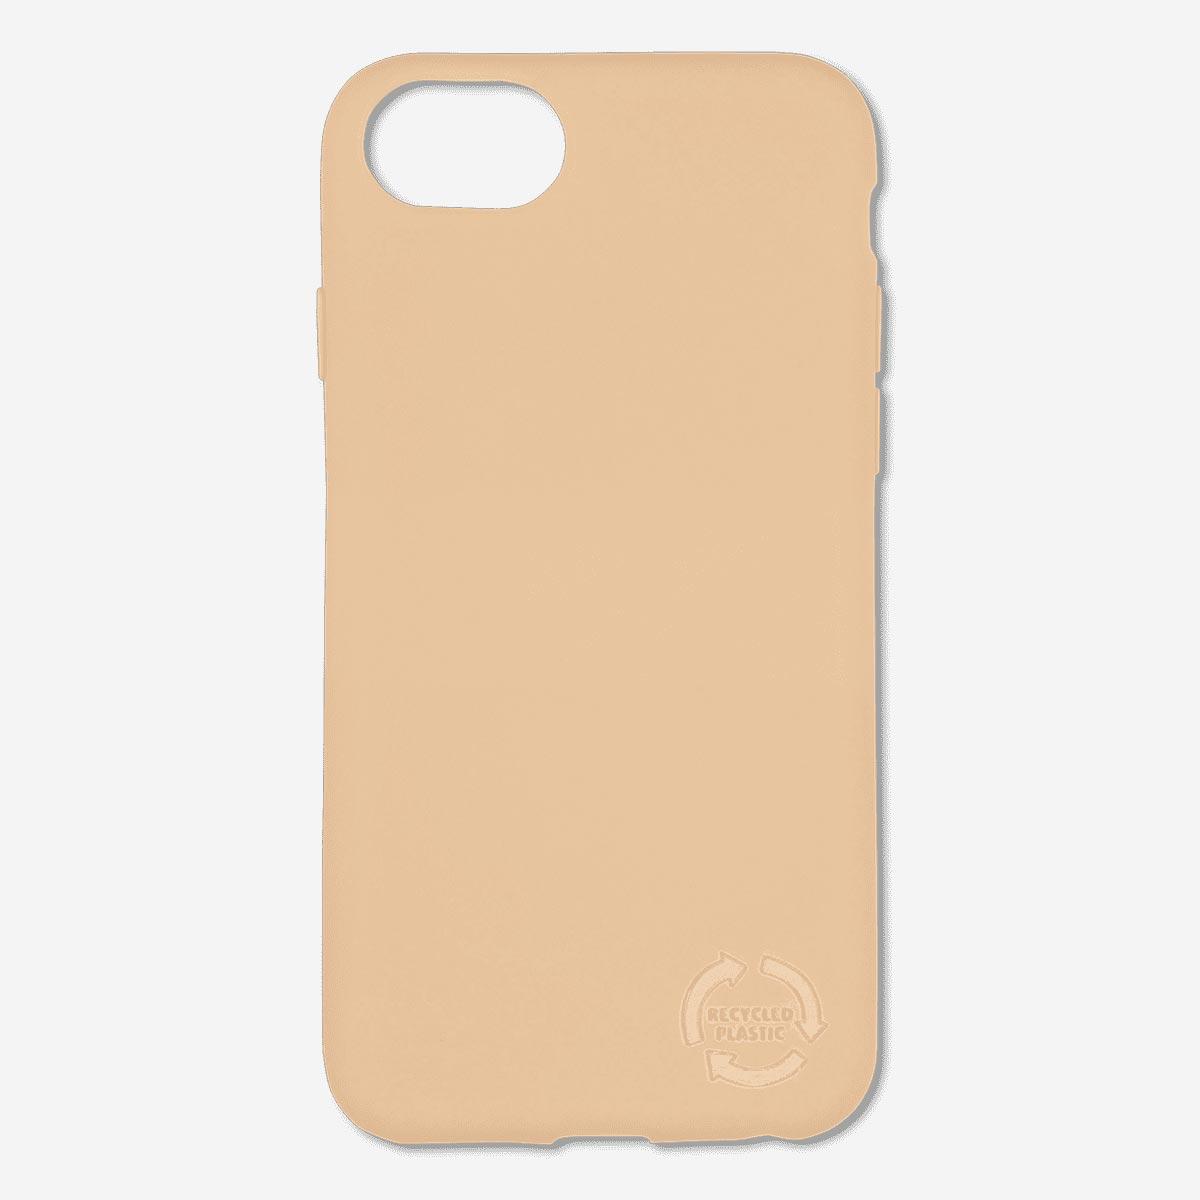 Cover. Fits iPhone 6/6s/7/8 €3| Flying Tiger